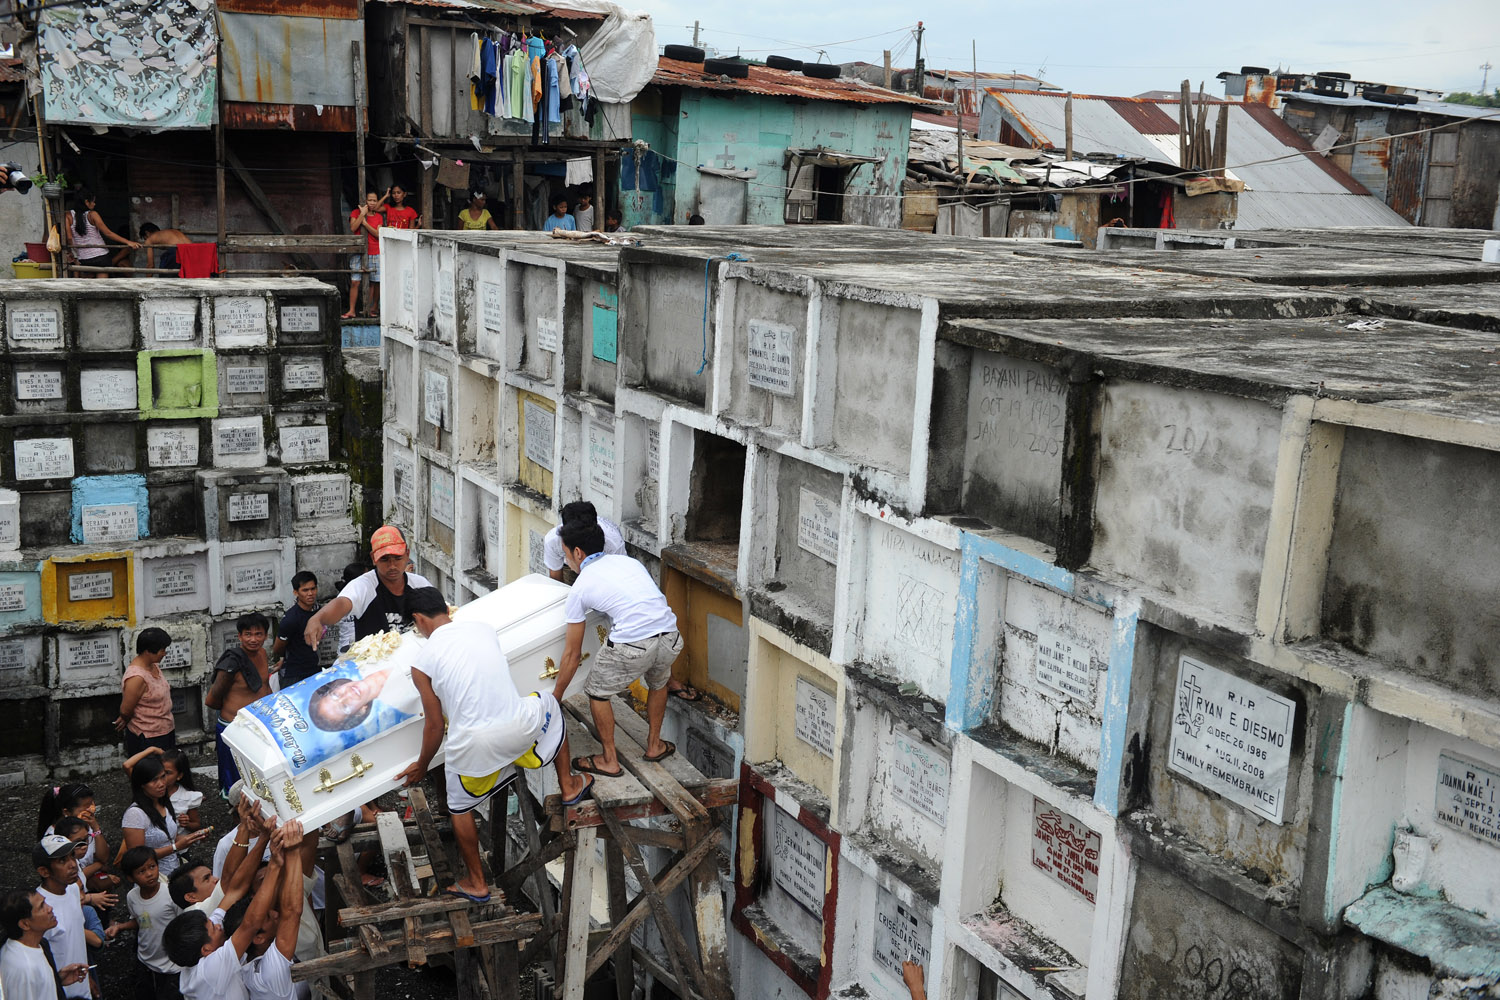 Image: Oct. 28, 2012. Workers place a coffin in a grave as relatives of the deceased watch at the Navotas Municipal Cemetery in Manila. Millions of Filipinos will soon flock to cemeteries around the country to visit departed relatives and loved ones as they mark All Saints Day and All Souls Day.